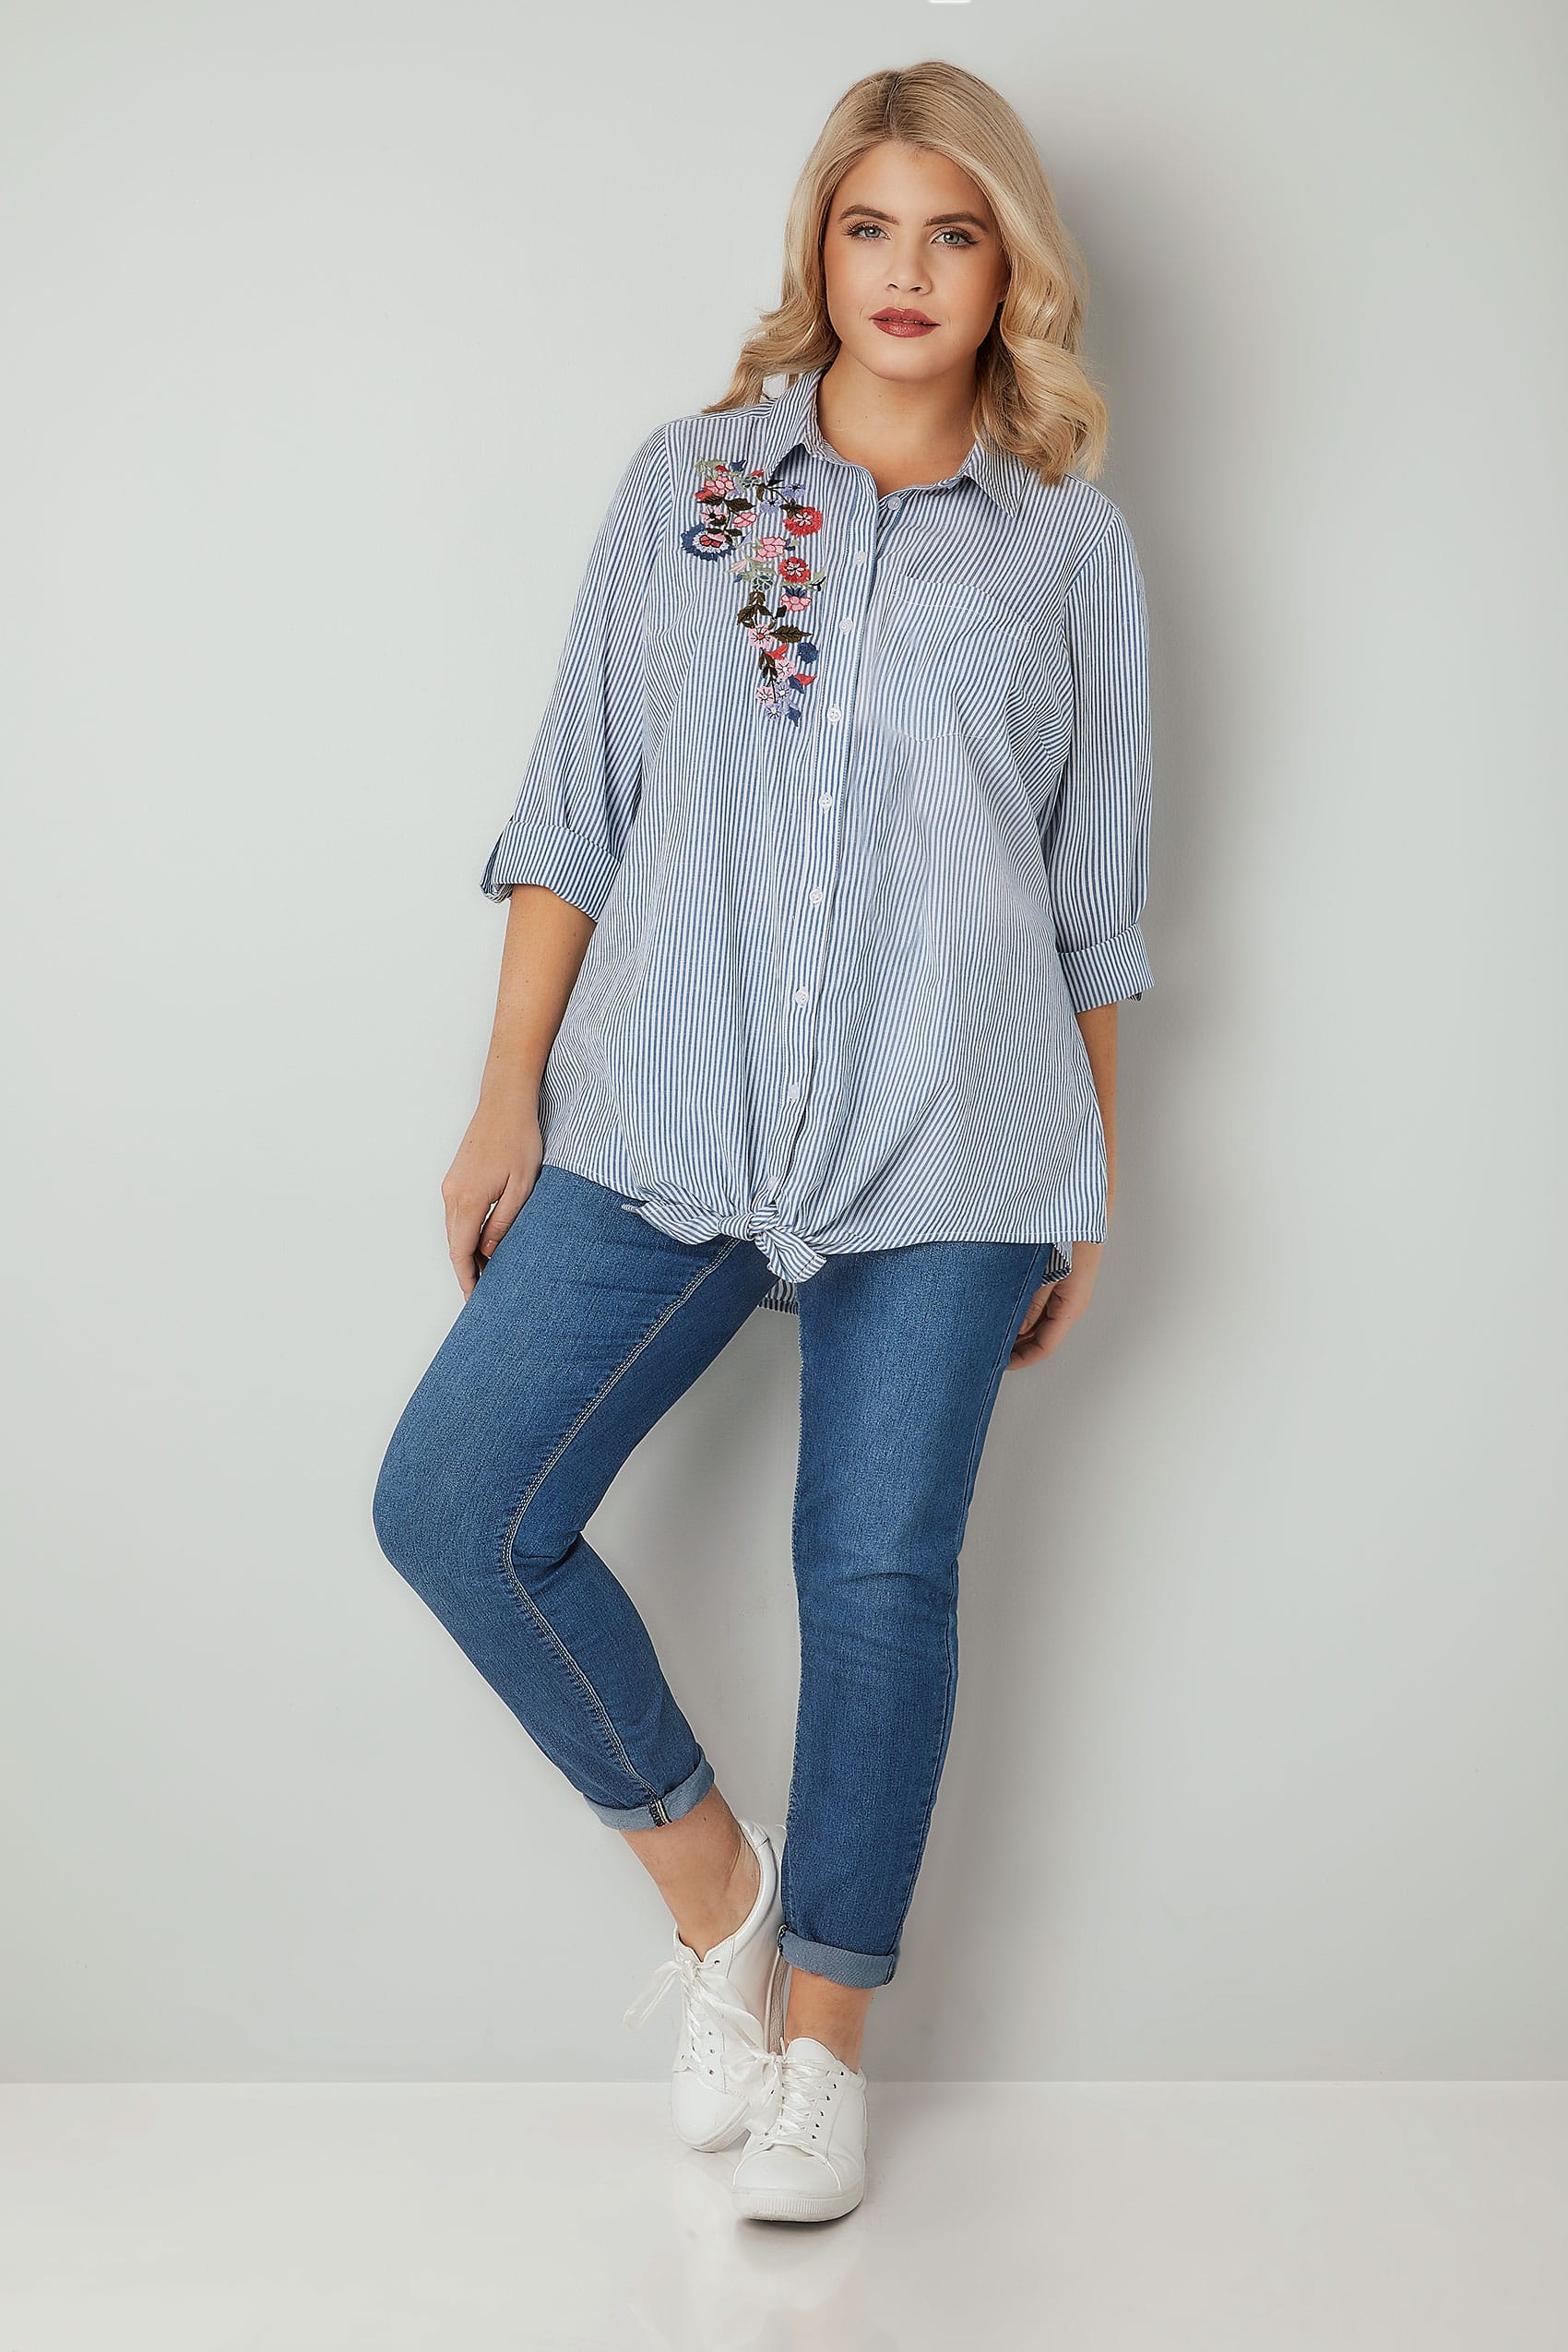 Blue & White Pinstripe Shirt With Floral Embroidered Patch, Plus size ...